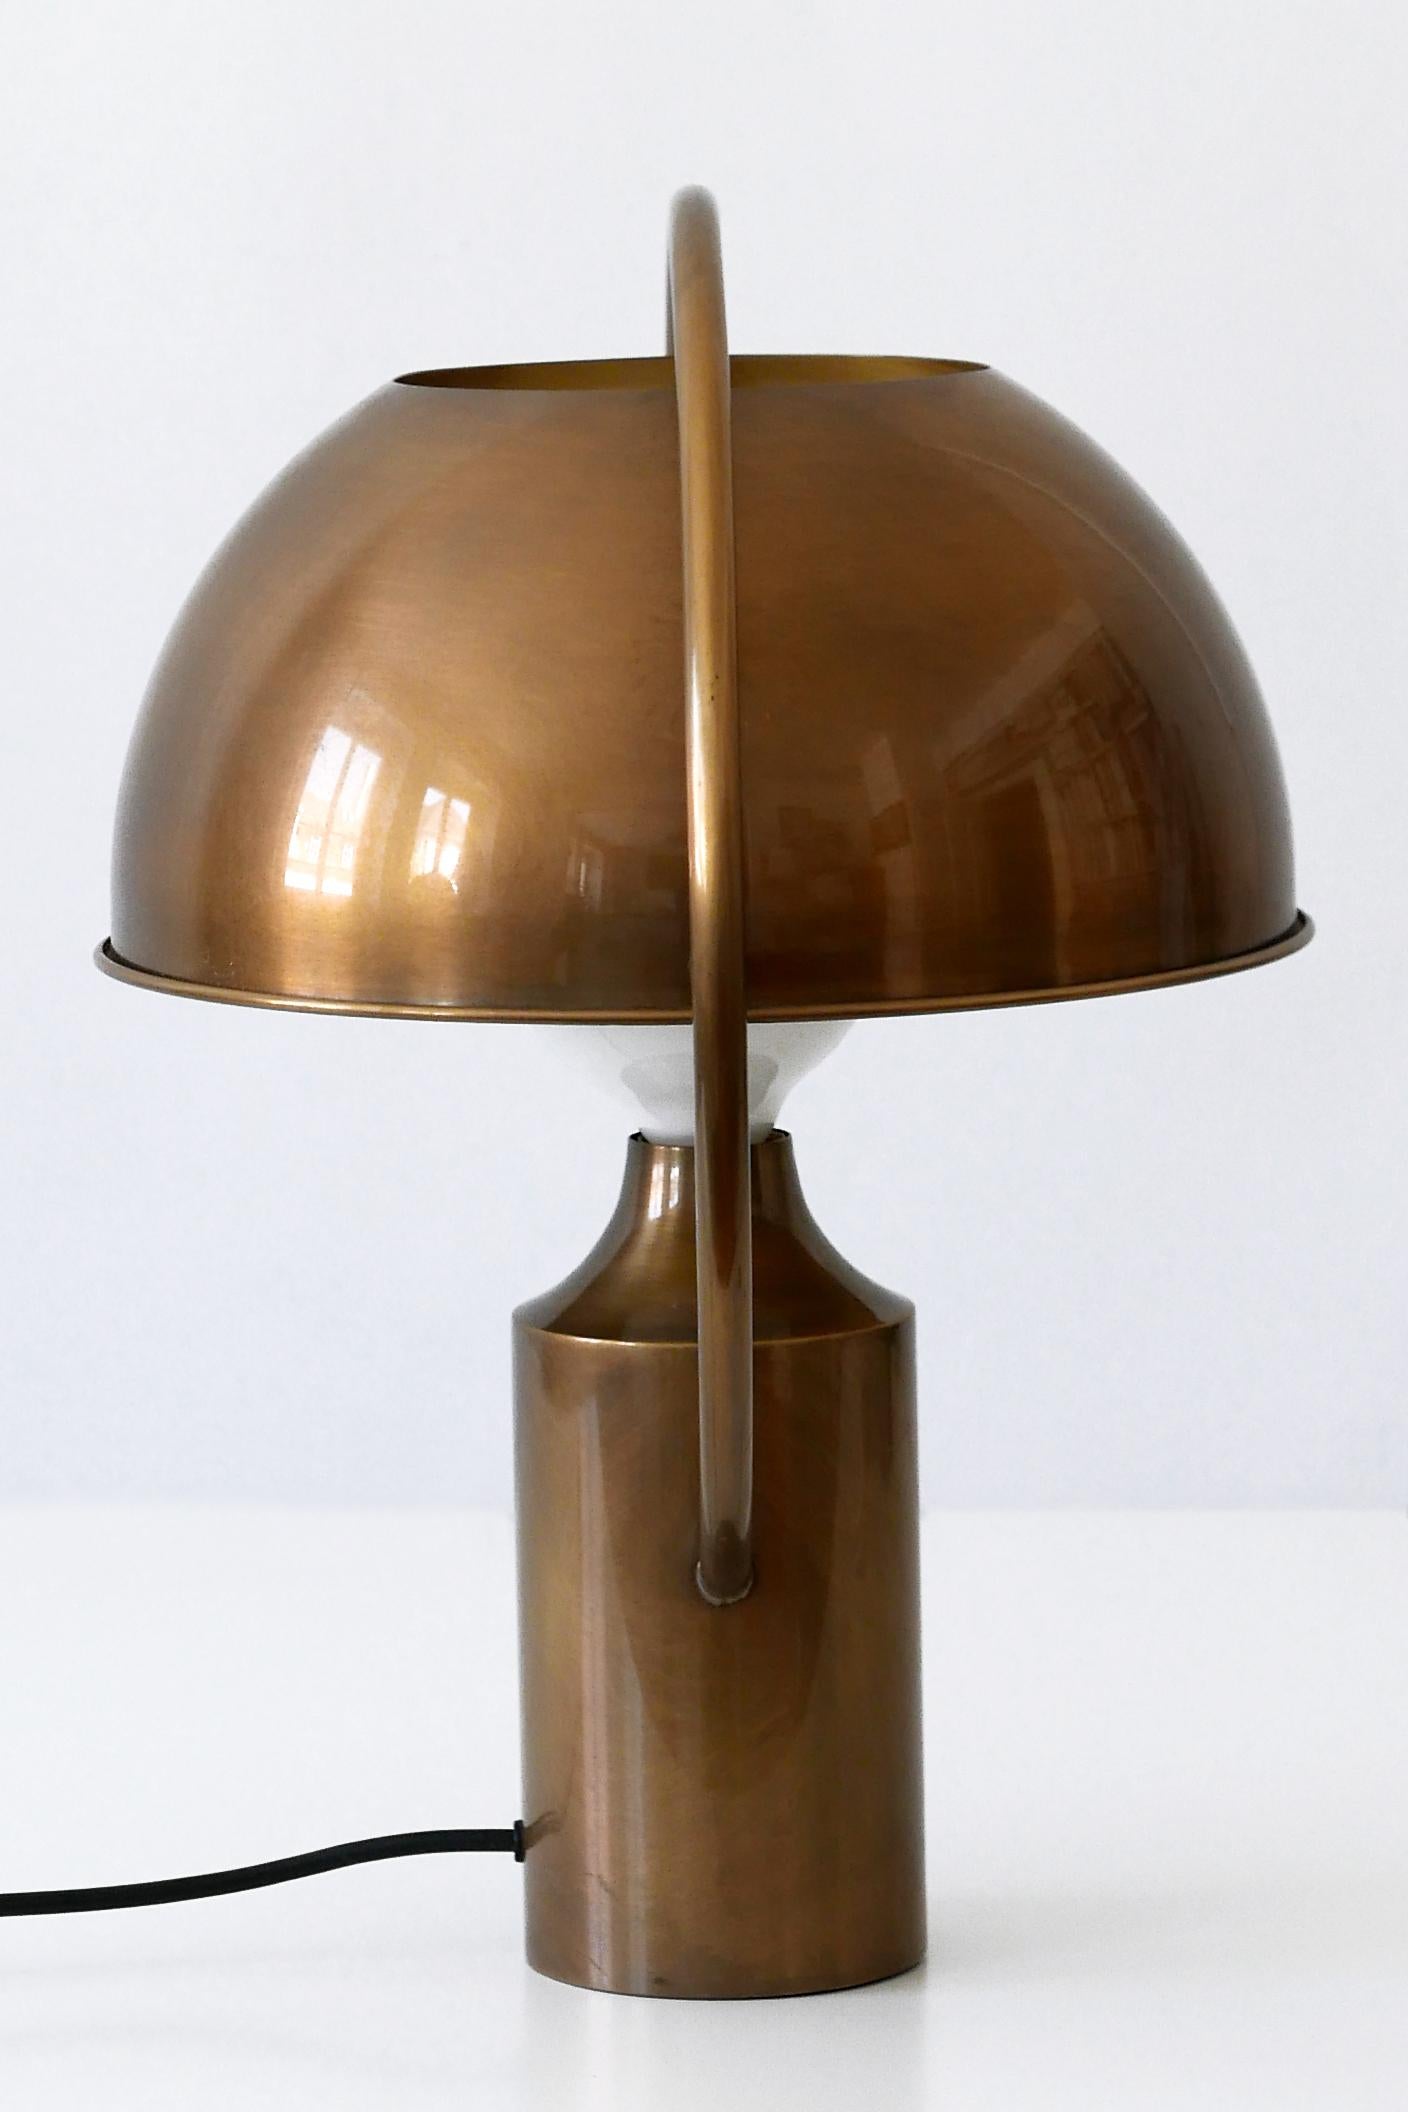 Extremely Rare Mid-Century Modern Table Lamp by Florian Schulz Germany 1970s For Sale 4